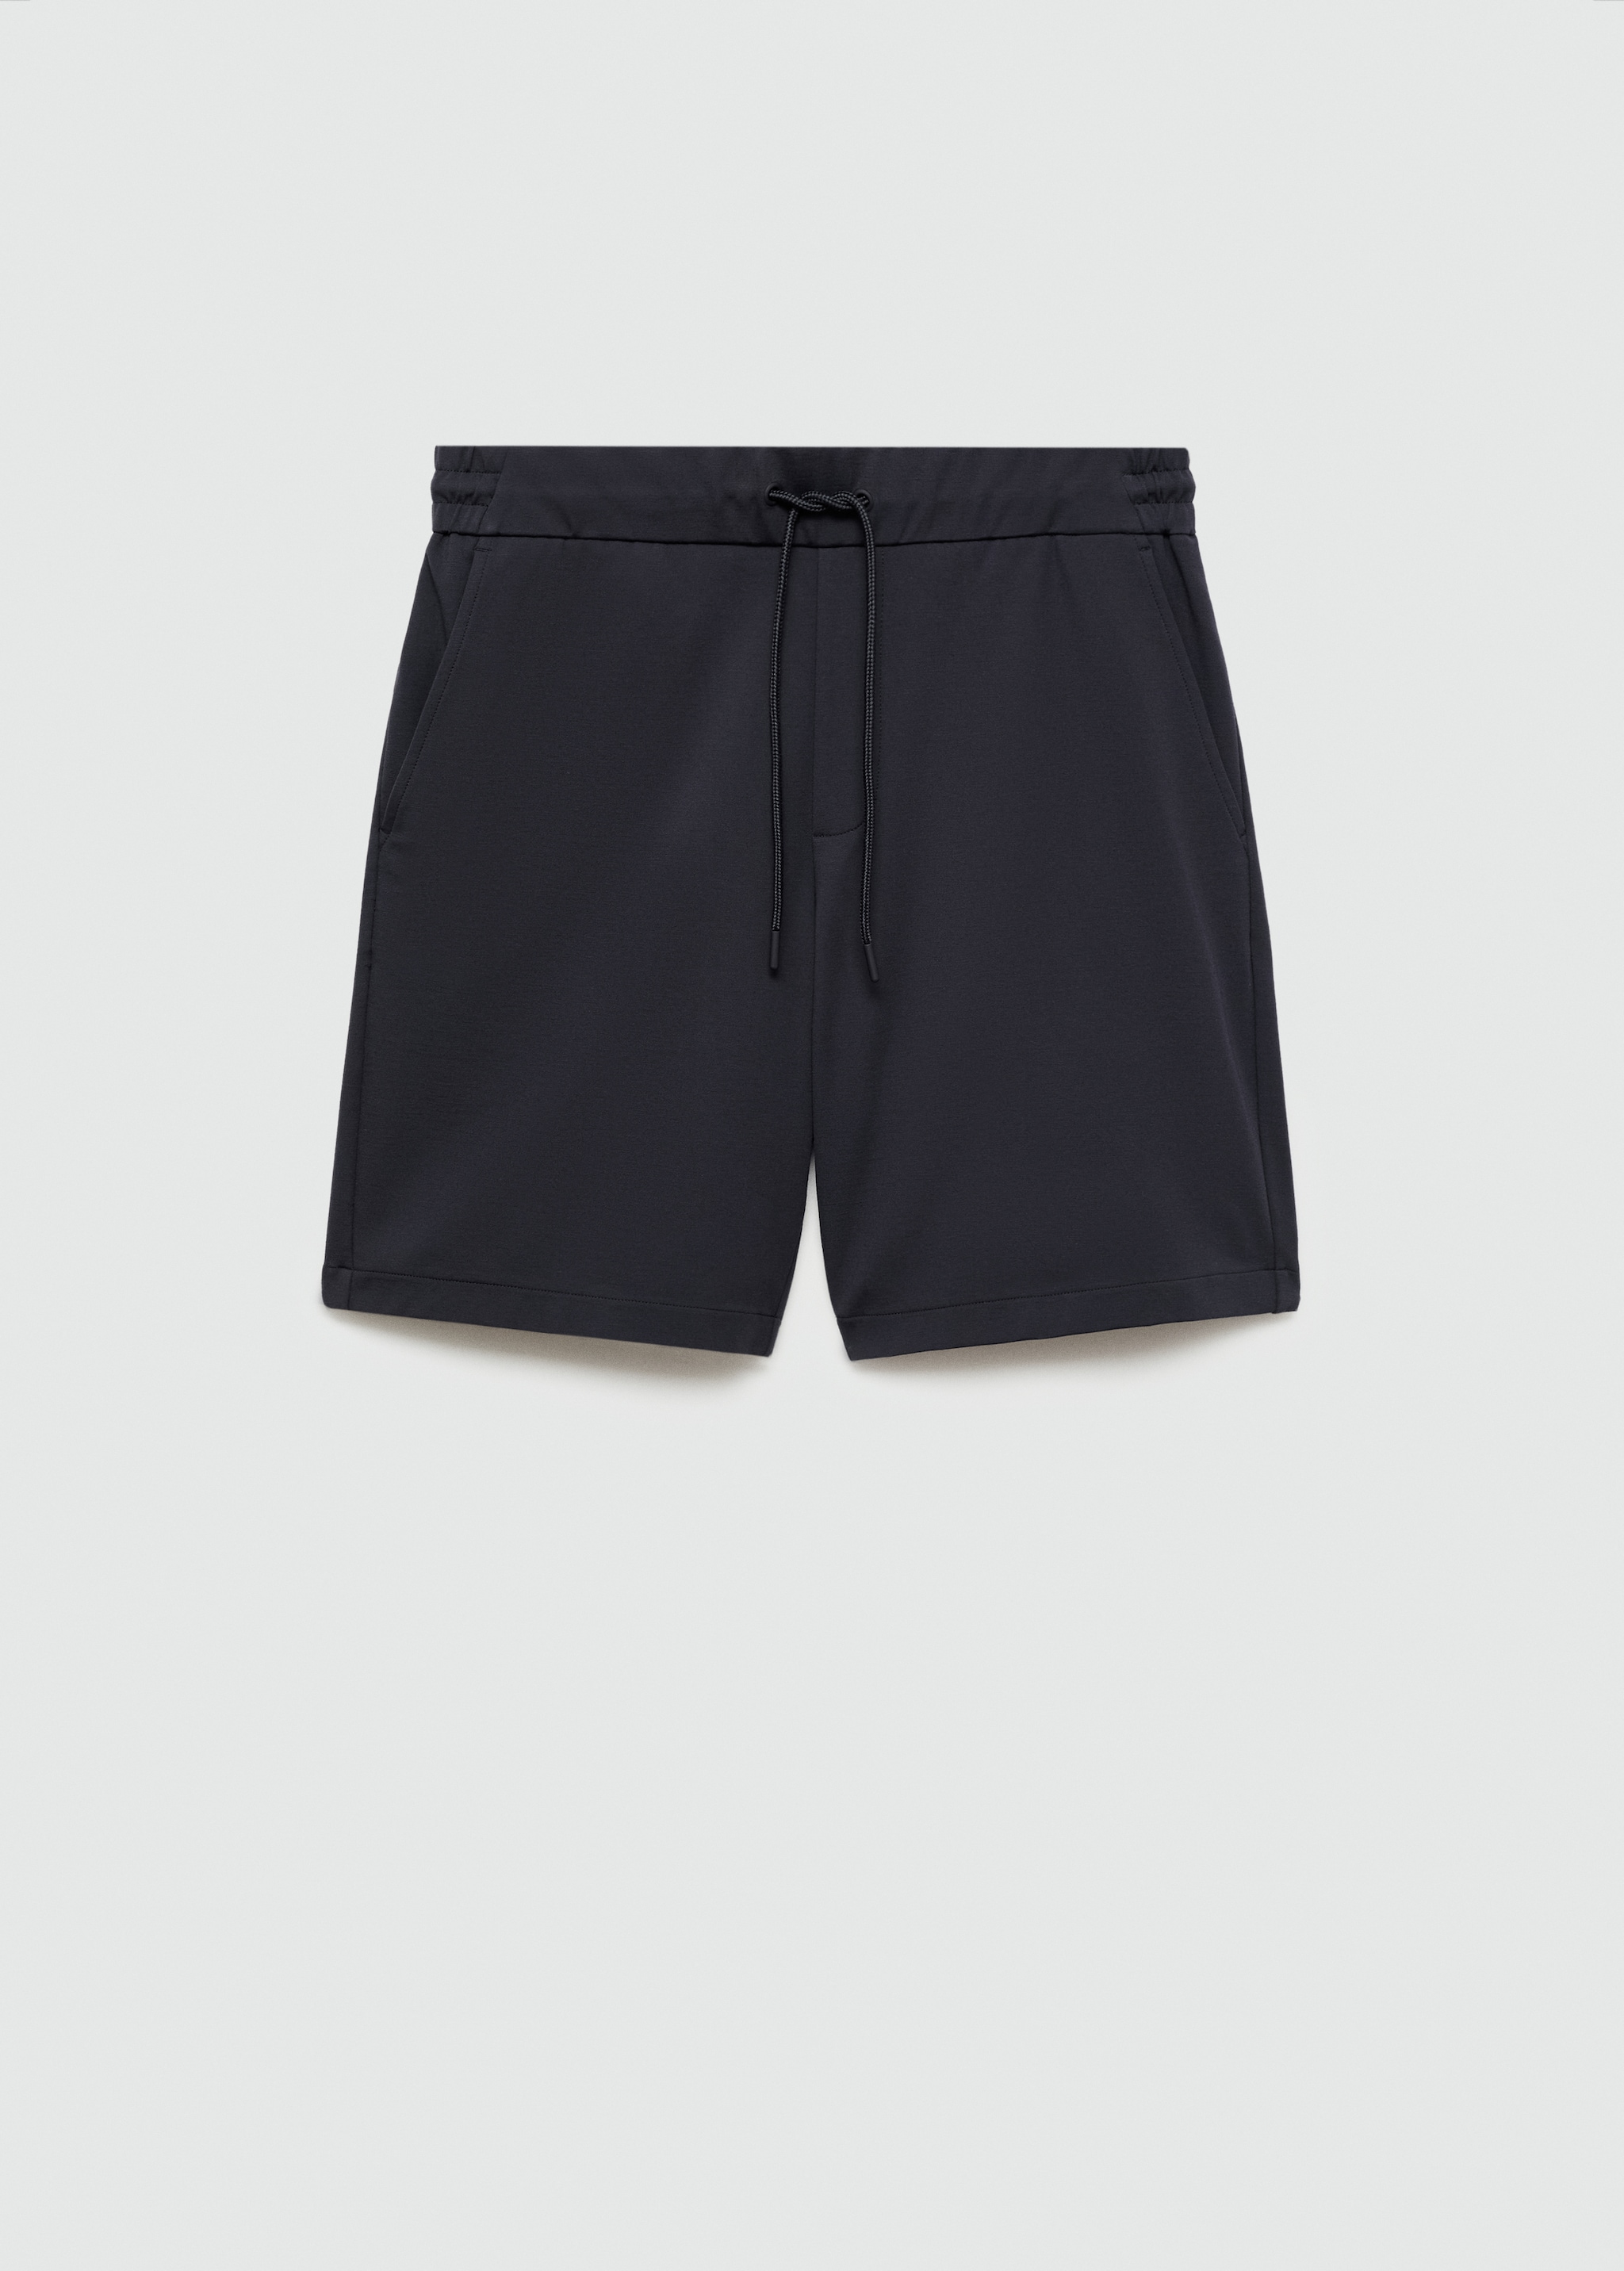 Technical fabric drawstring Bermuda shorts - Article without model